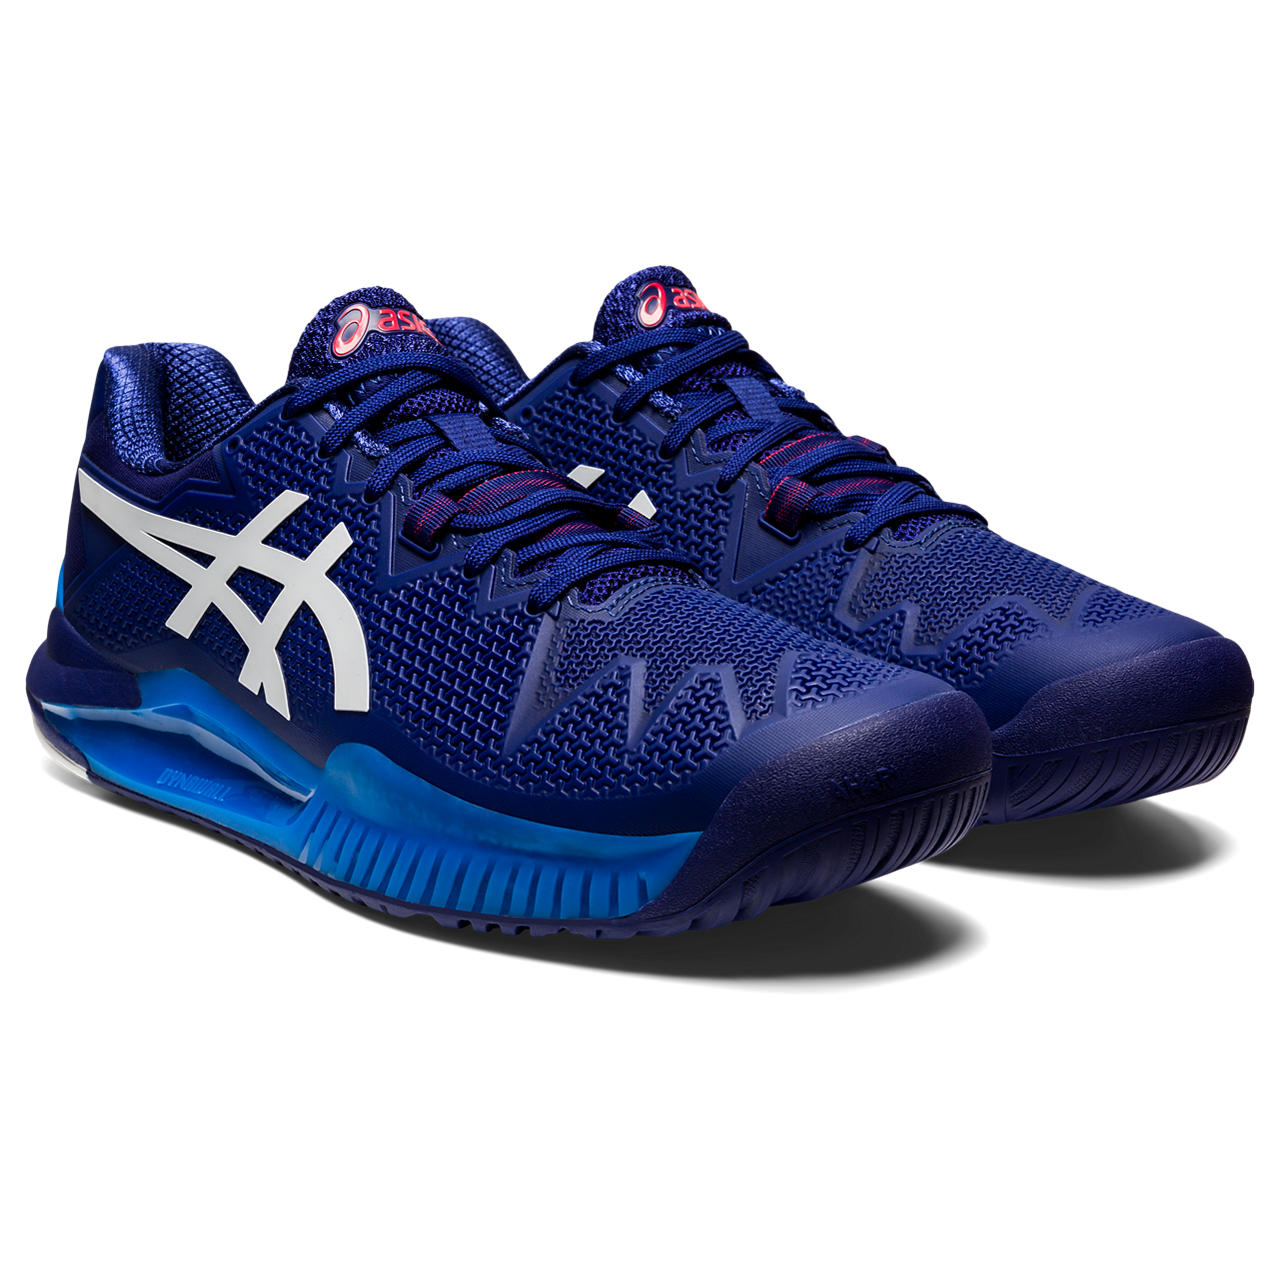 Front angle view of the Men's ASIC Gel Resolution 8 tennis shoe in the color Blue